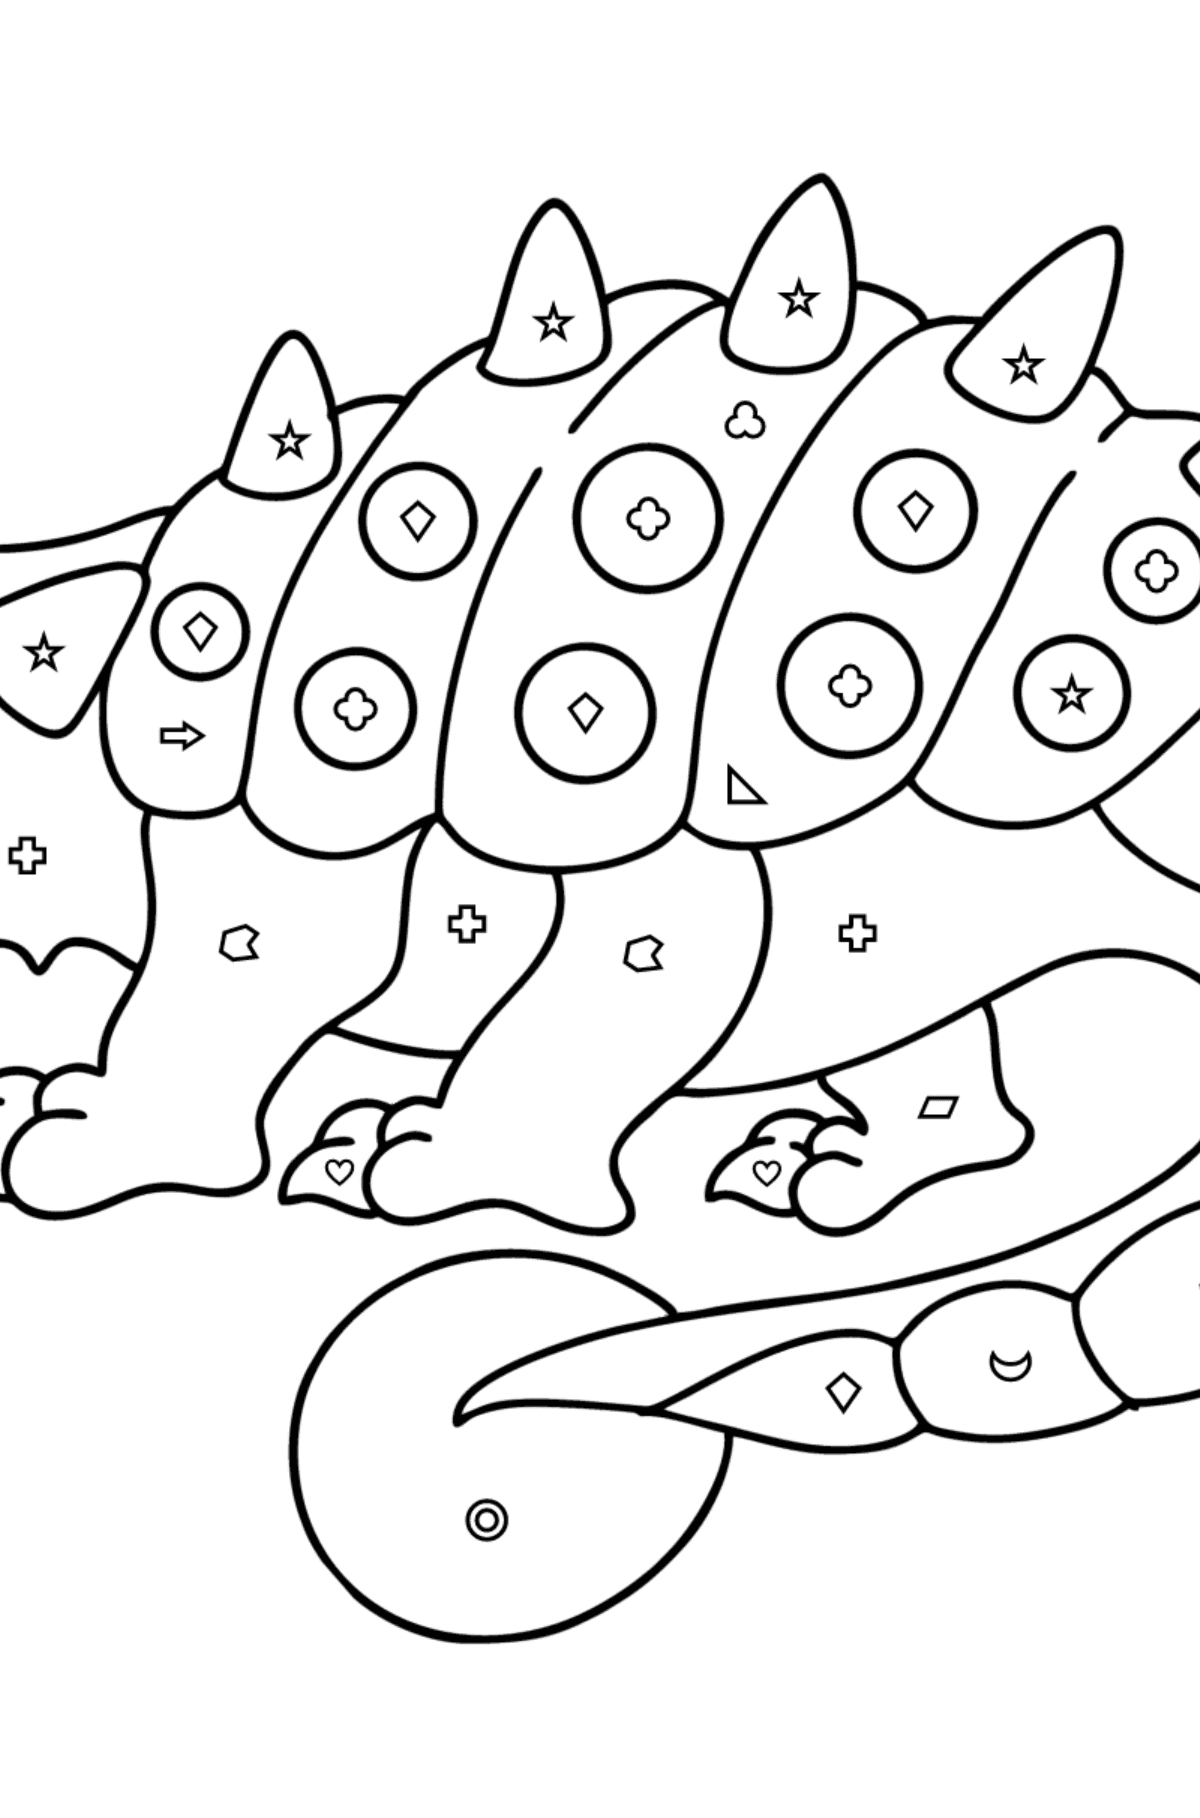 Ankylosaurus coloring page - Coloring by Geometric Shapes for Kids